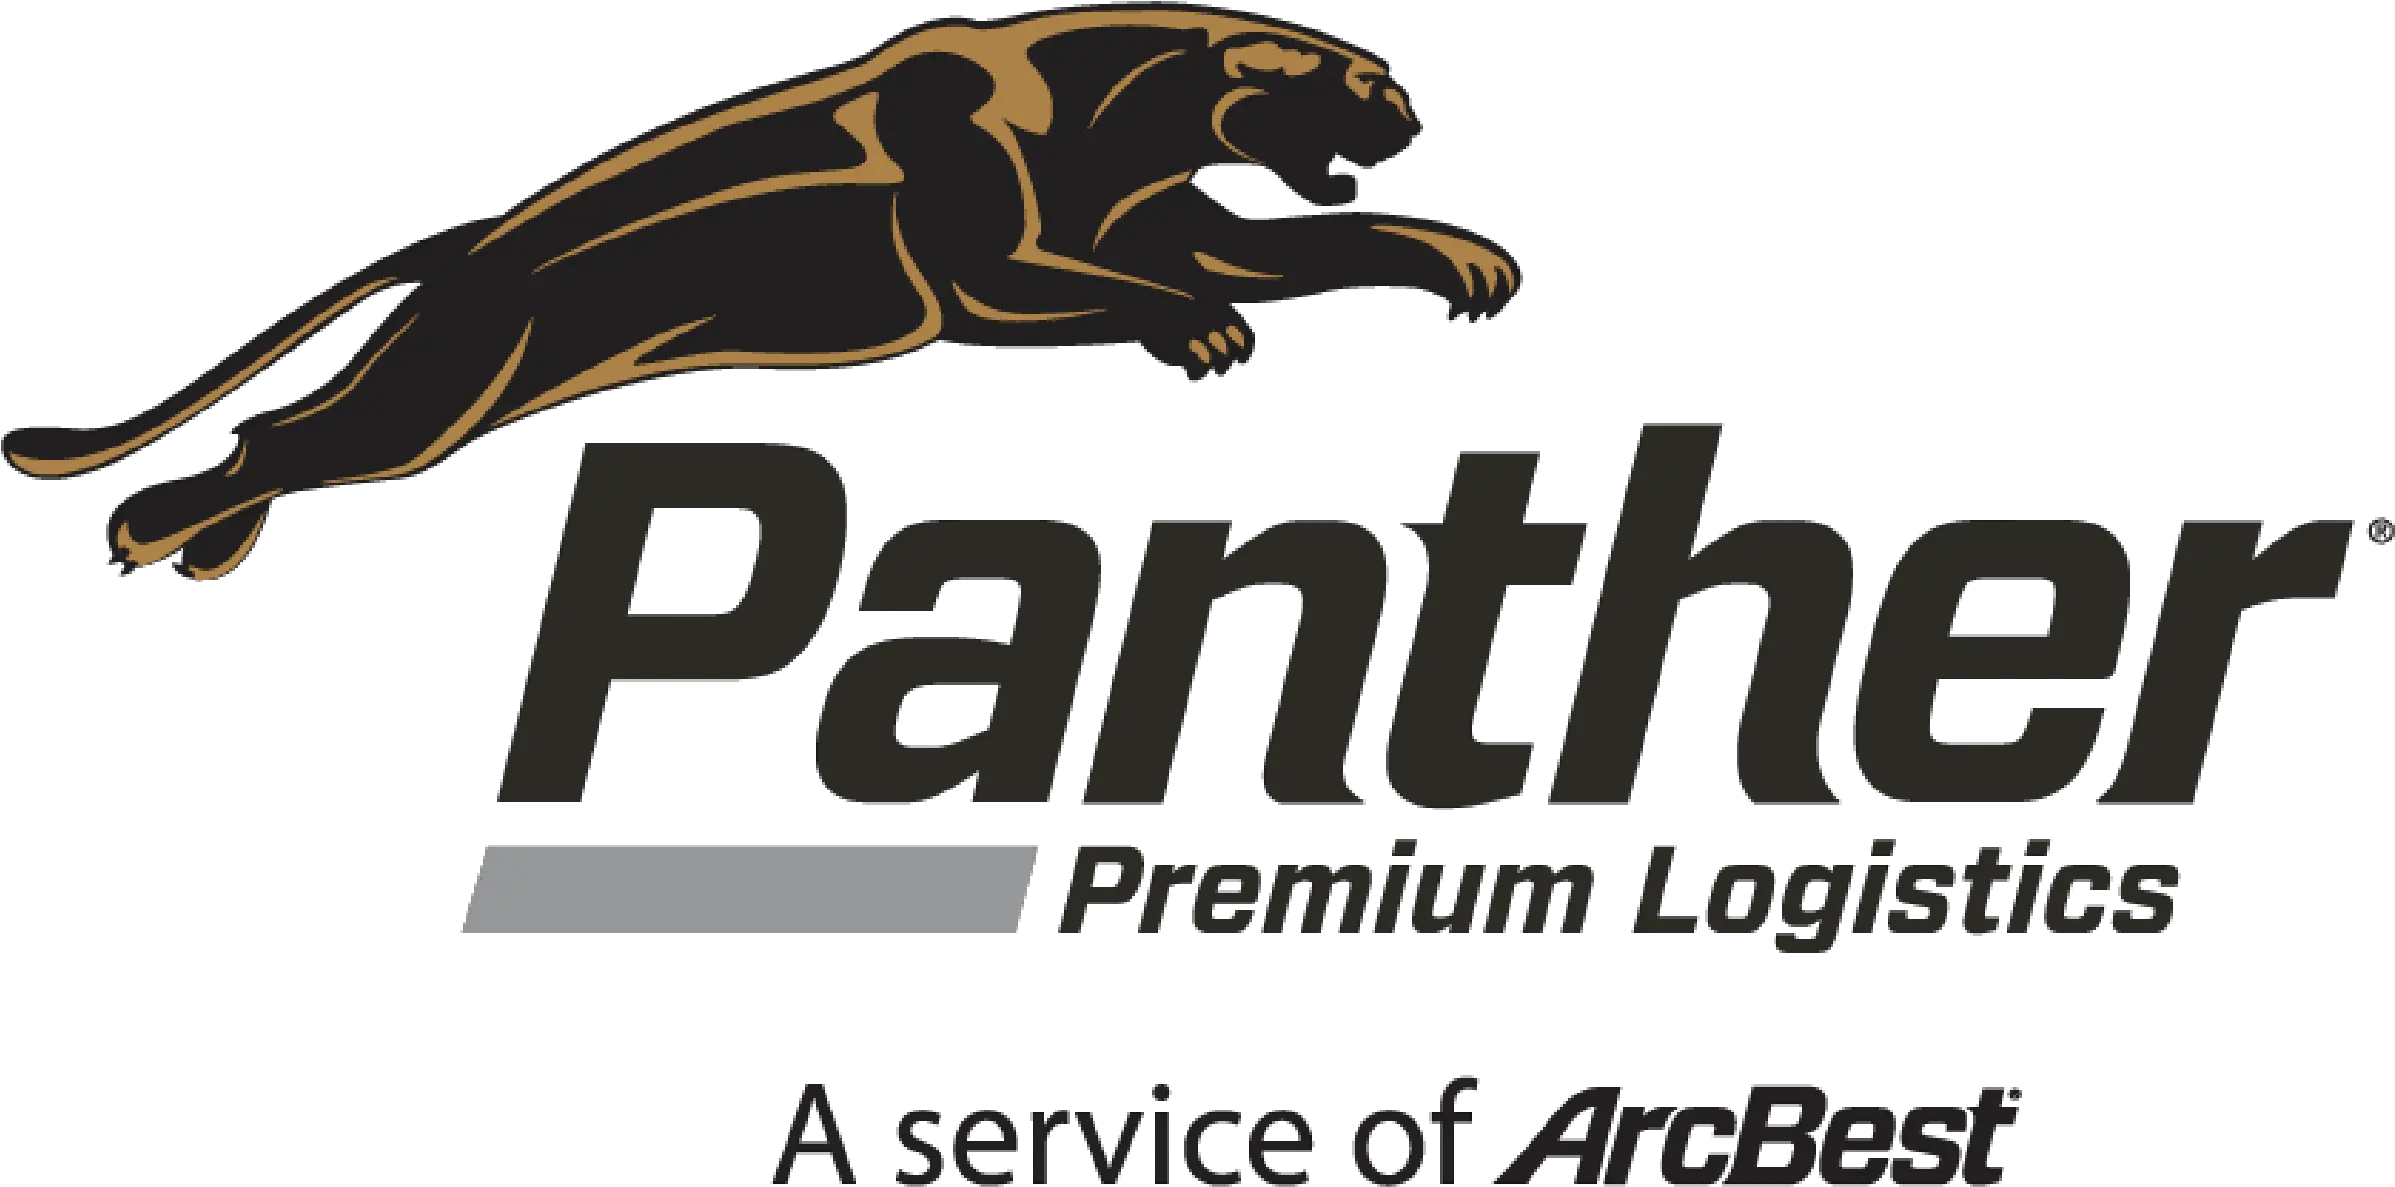 Panther Logo Abf Freight Png Download Original Size Png Panther Expedited Services Panther Png